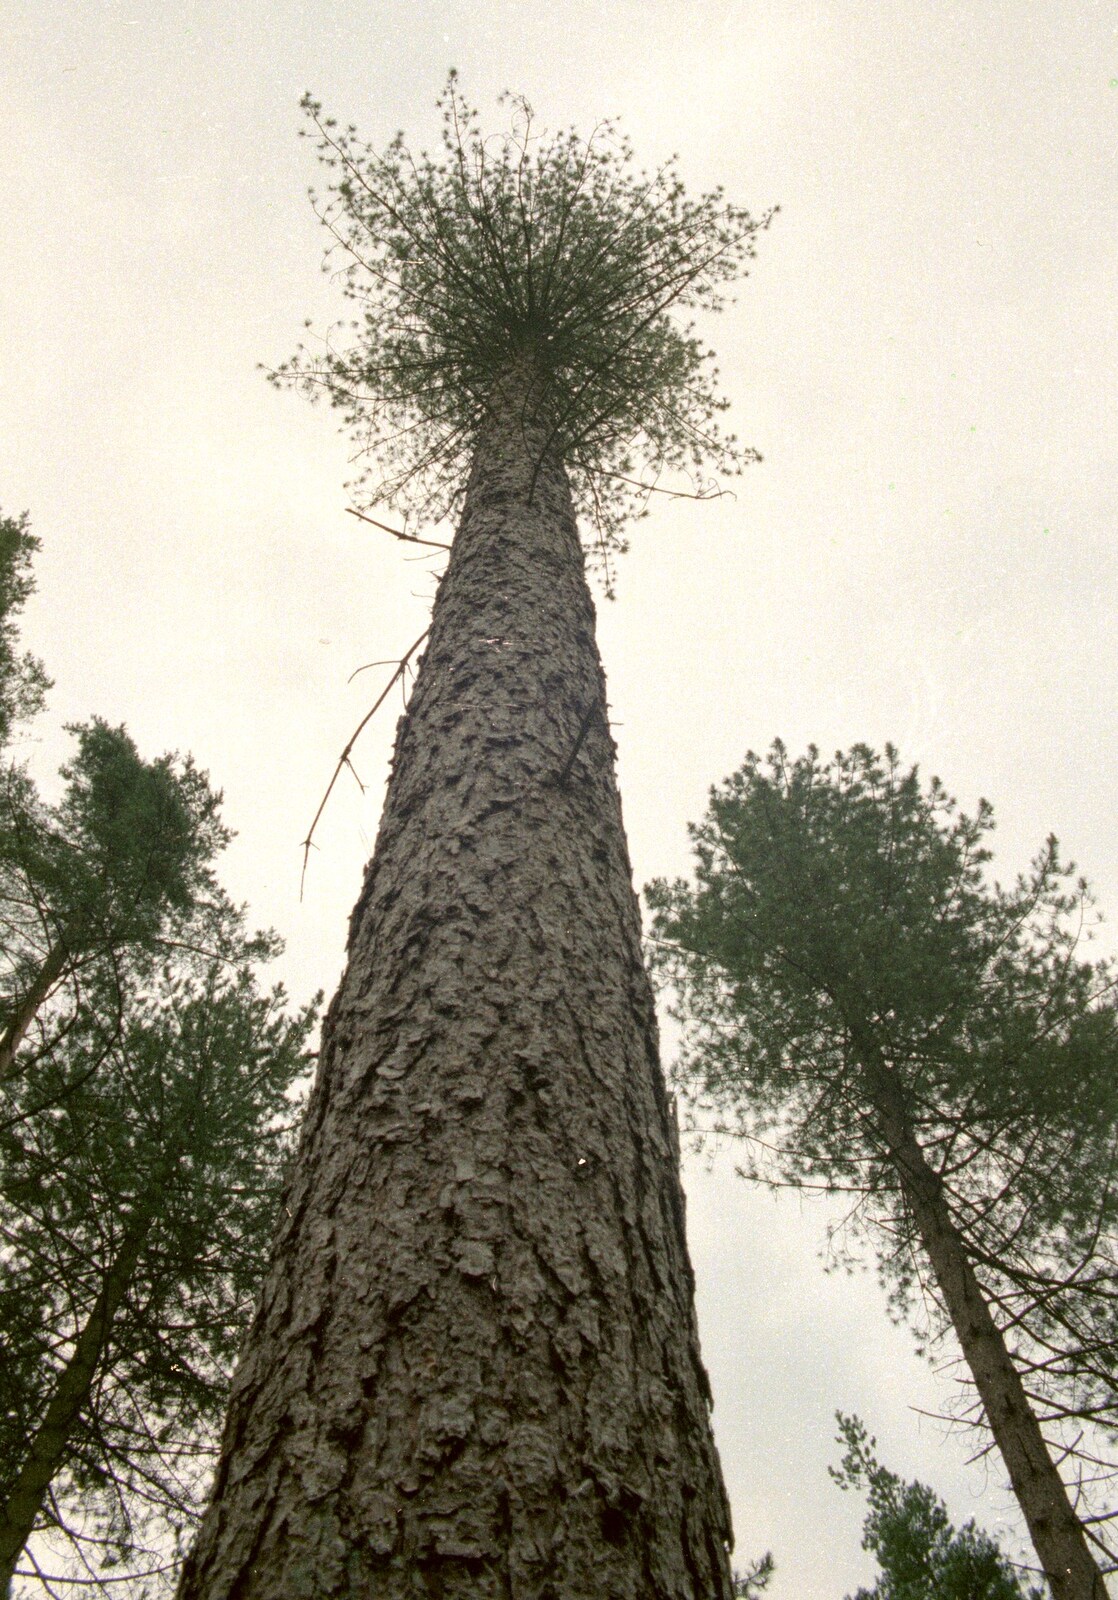 A tuft of foliage on a tall pine tree from Bracken Way, Walkford, Dorset - 15th September 1986